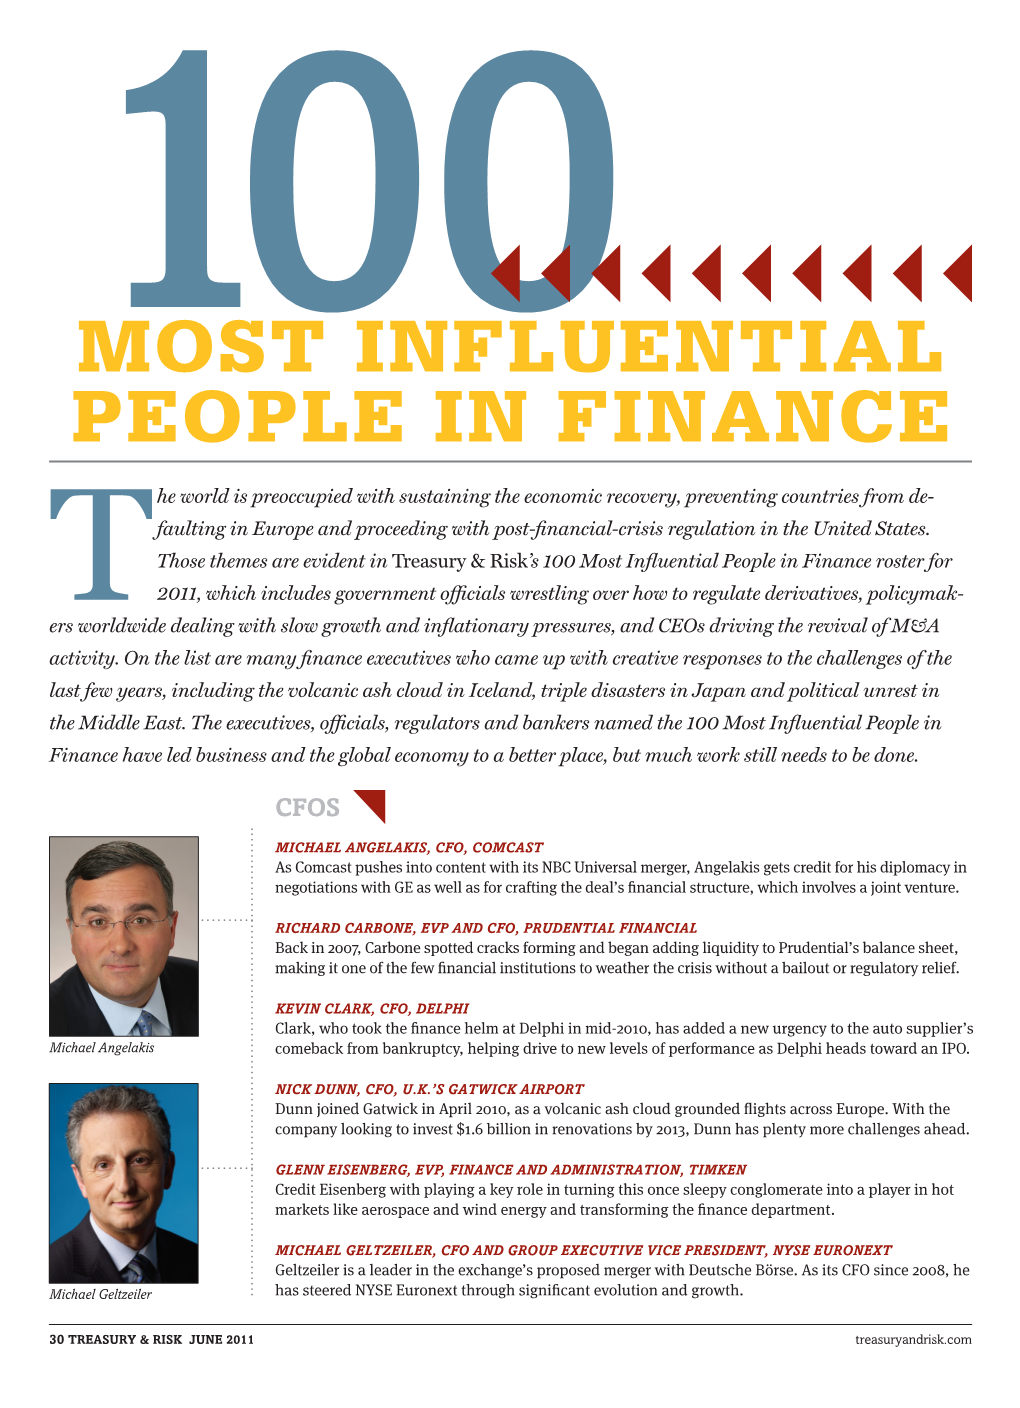 Most Influential People in Finance